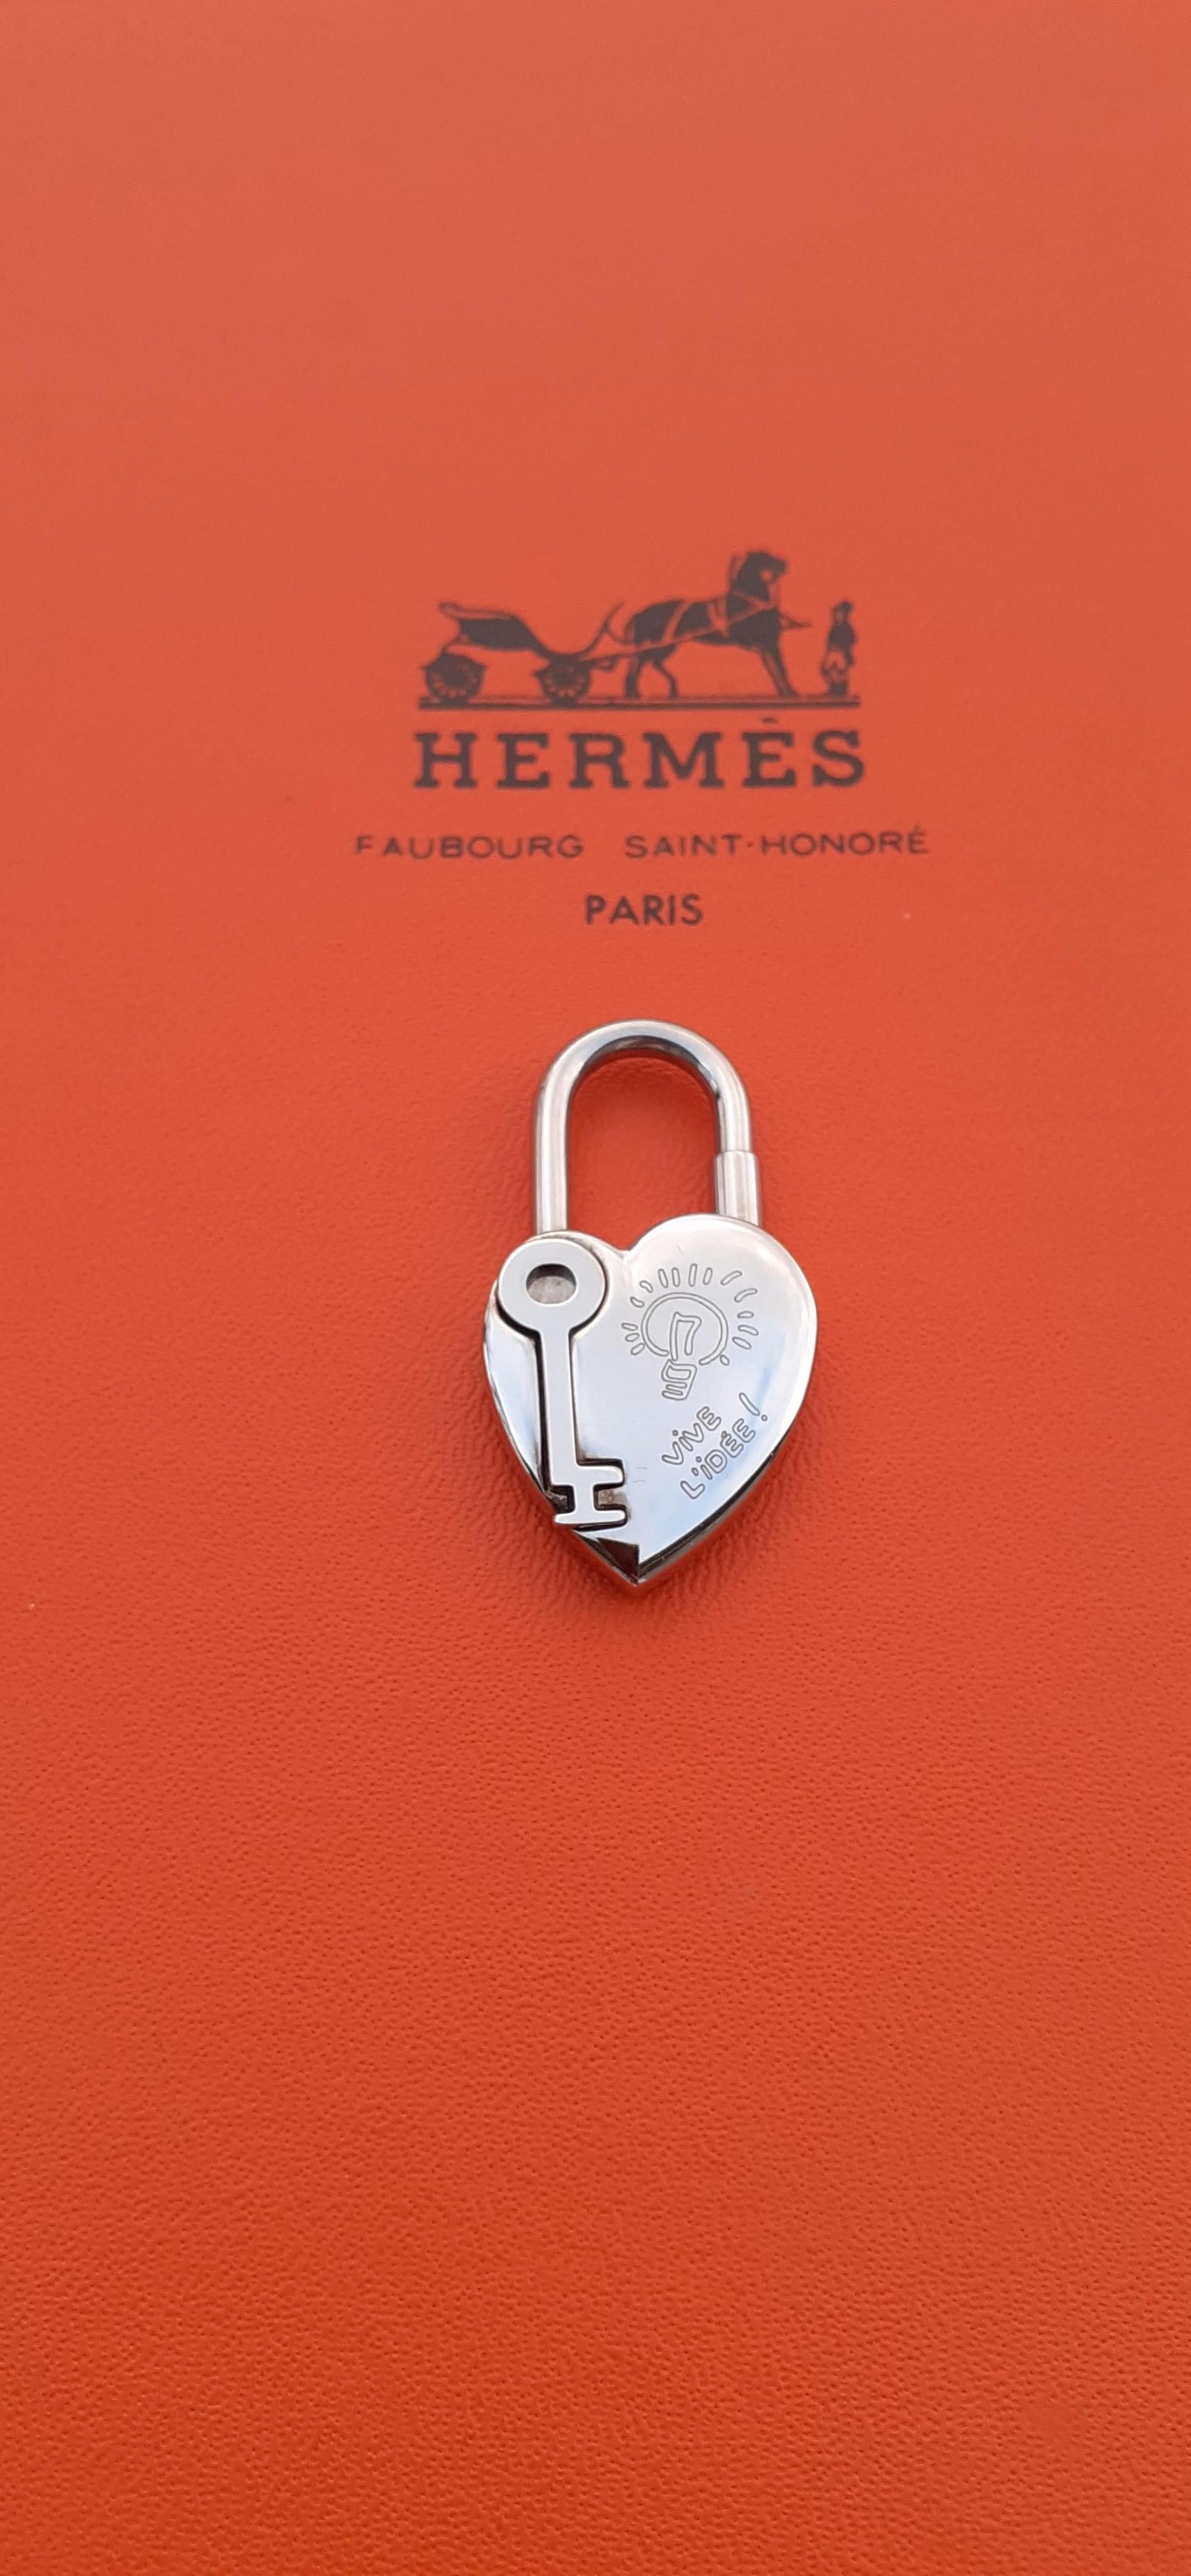 Collectible Authentic Hermès Padlock

Can be used as bag Charm

In shape of a Heart with its Key 

Special Edition for the Hermès Year of Fantasy 2004

Made of palladium plated (silver-tone)

Colorway: silvery

